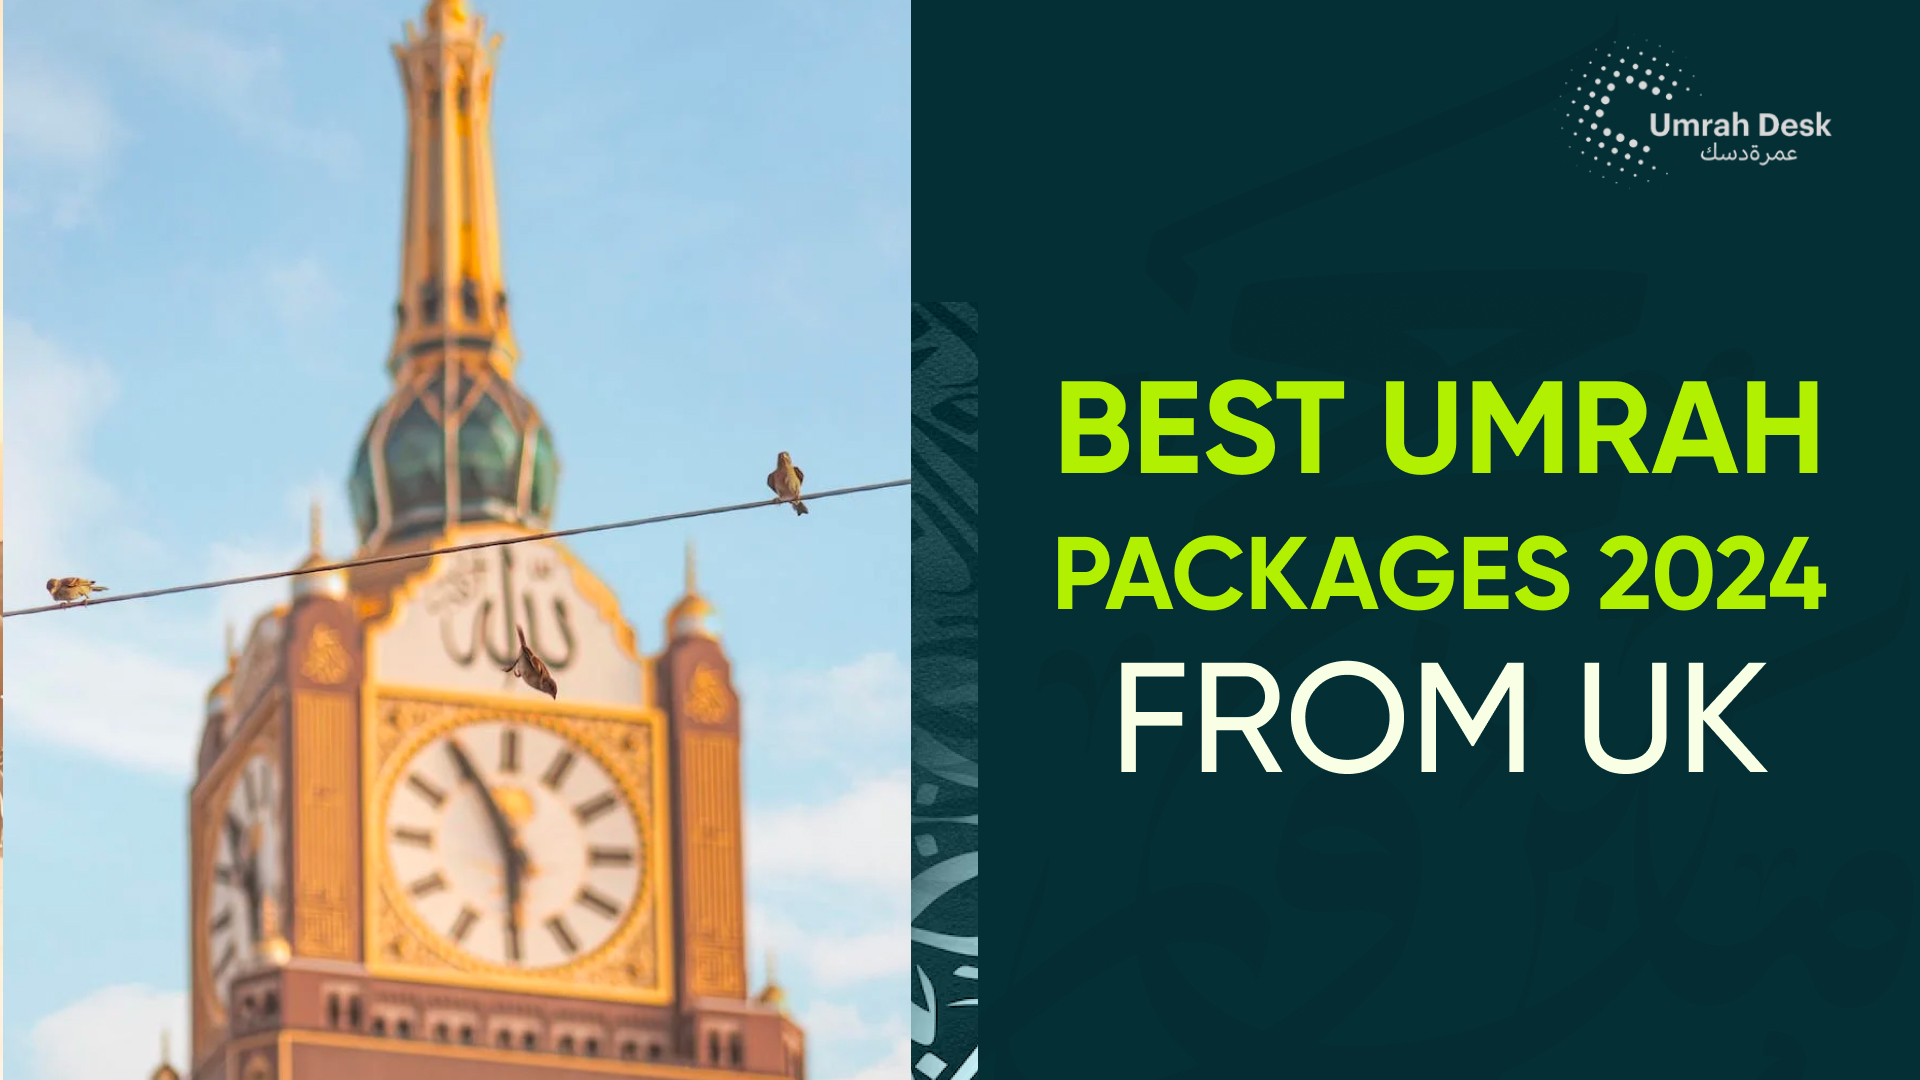 Best Umrah Packages 2024 From UK